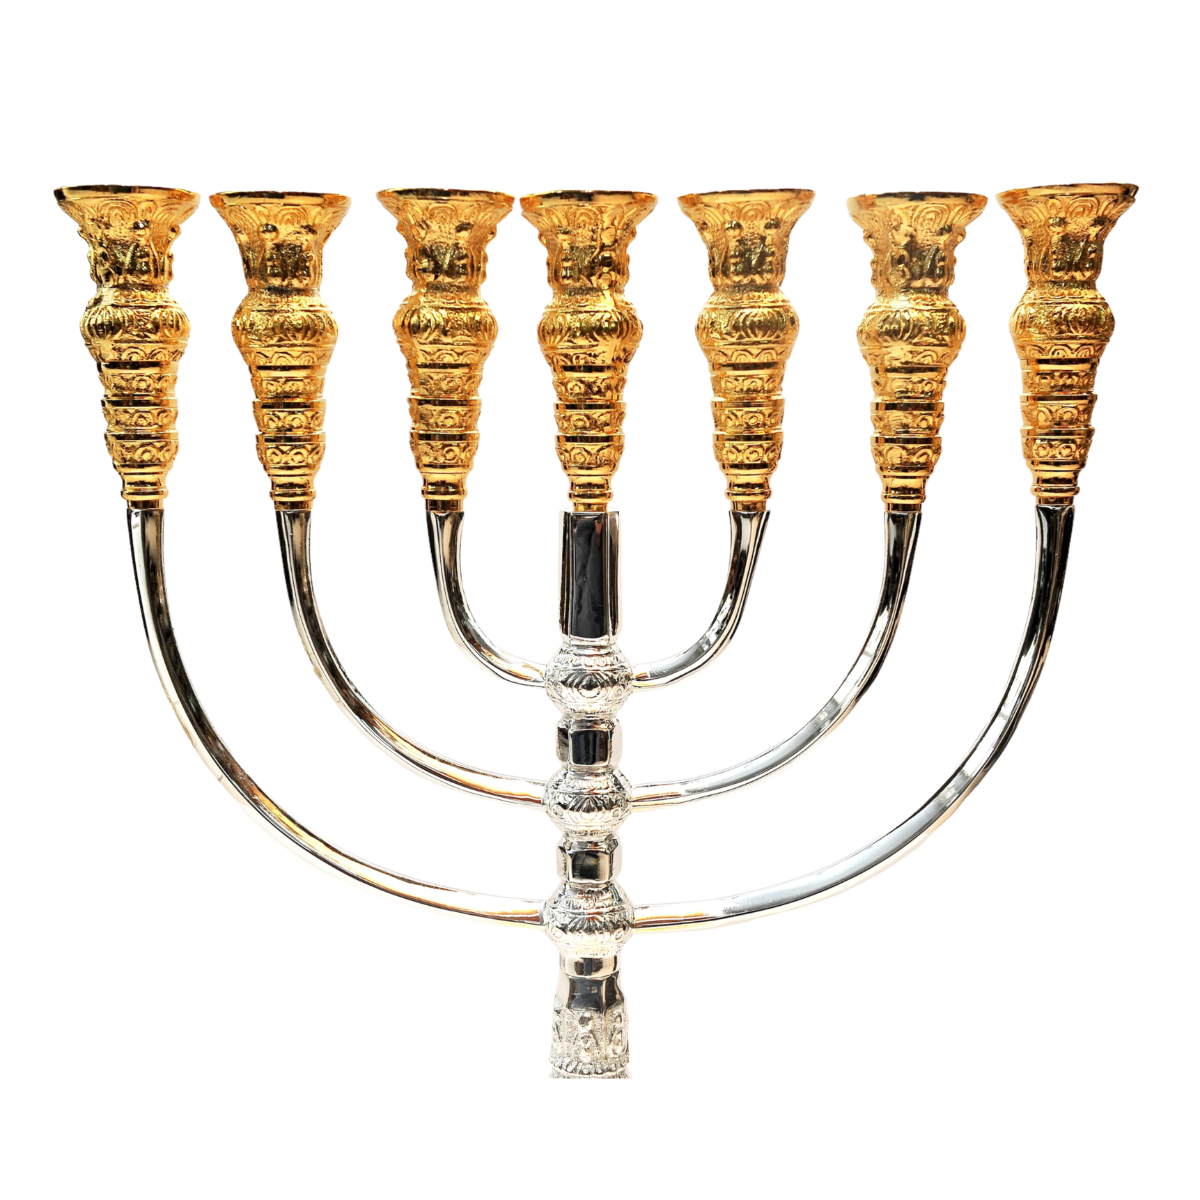 Menorah Gold & Silver Plated Candle Holder from Jerusalem 25.6″ / 65 cm